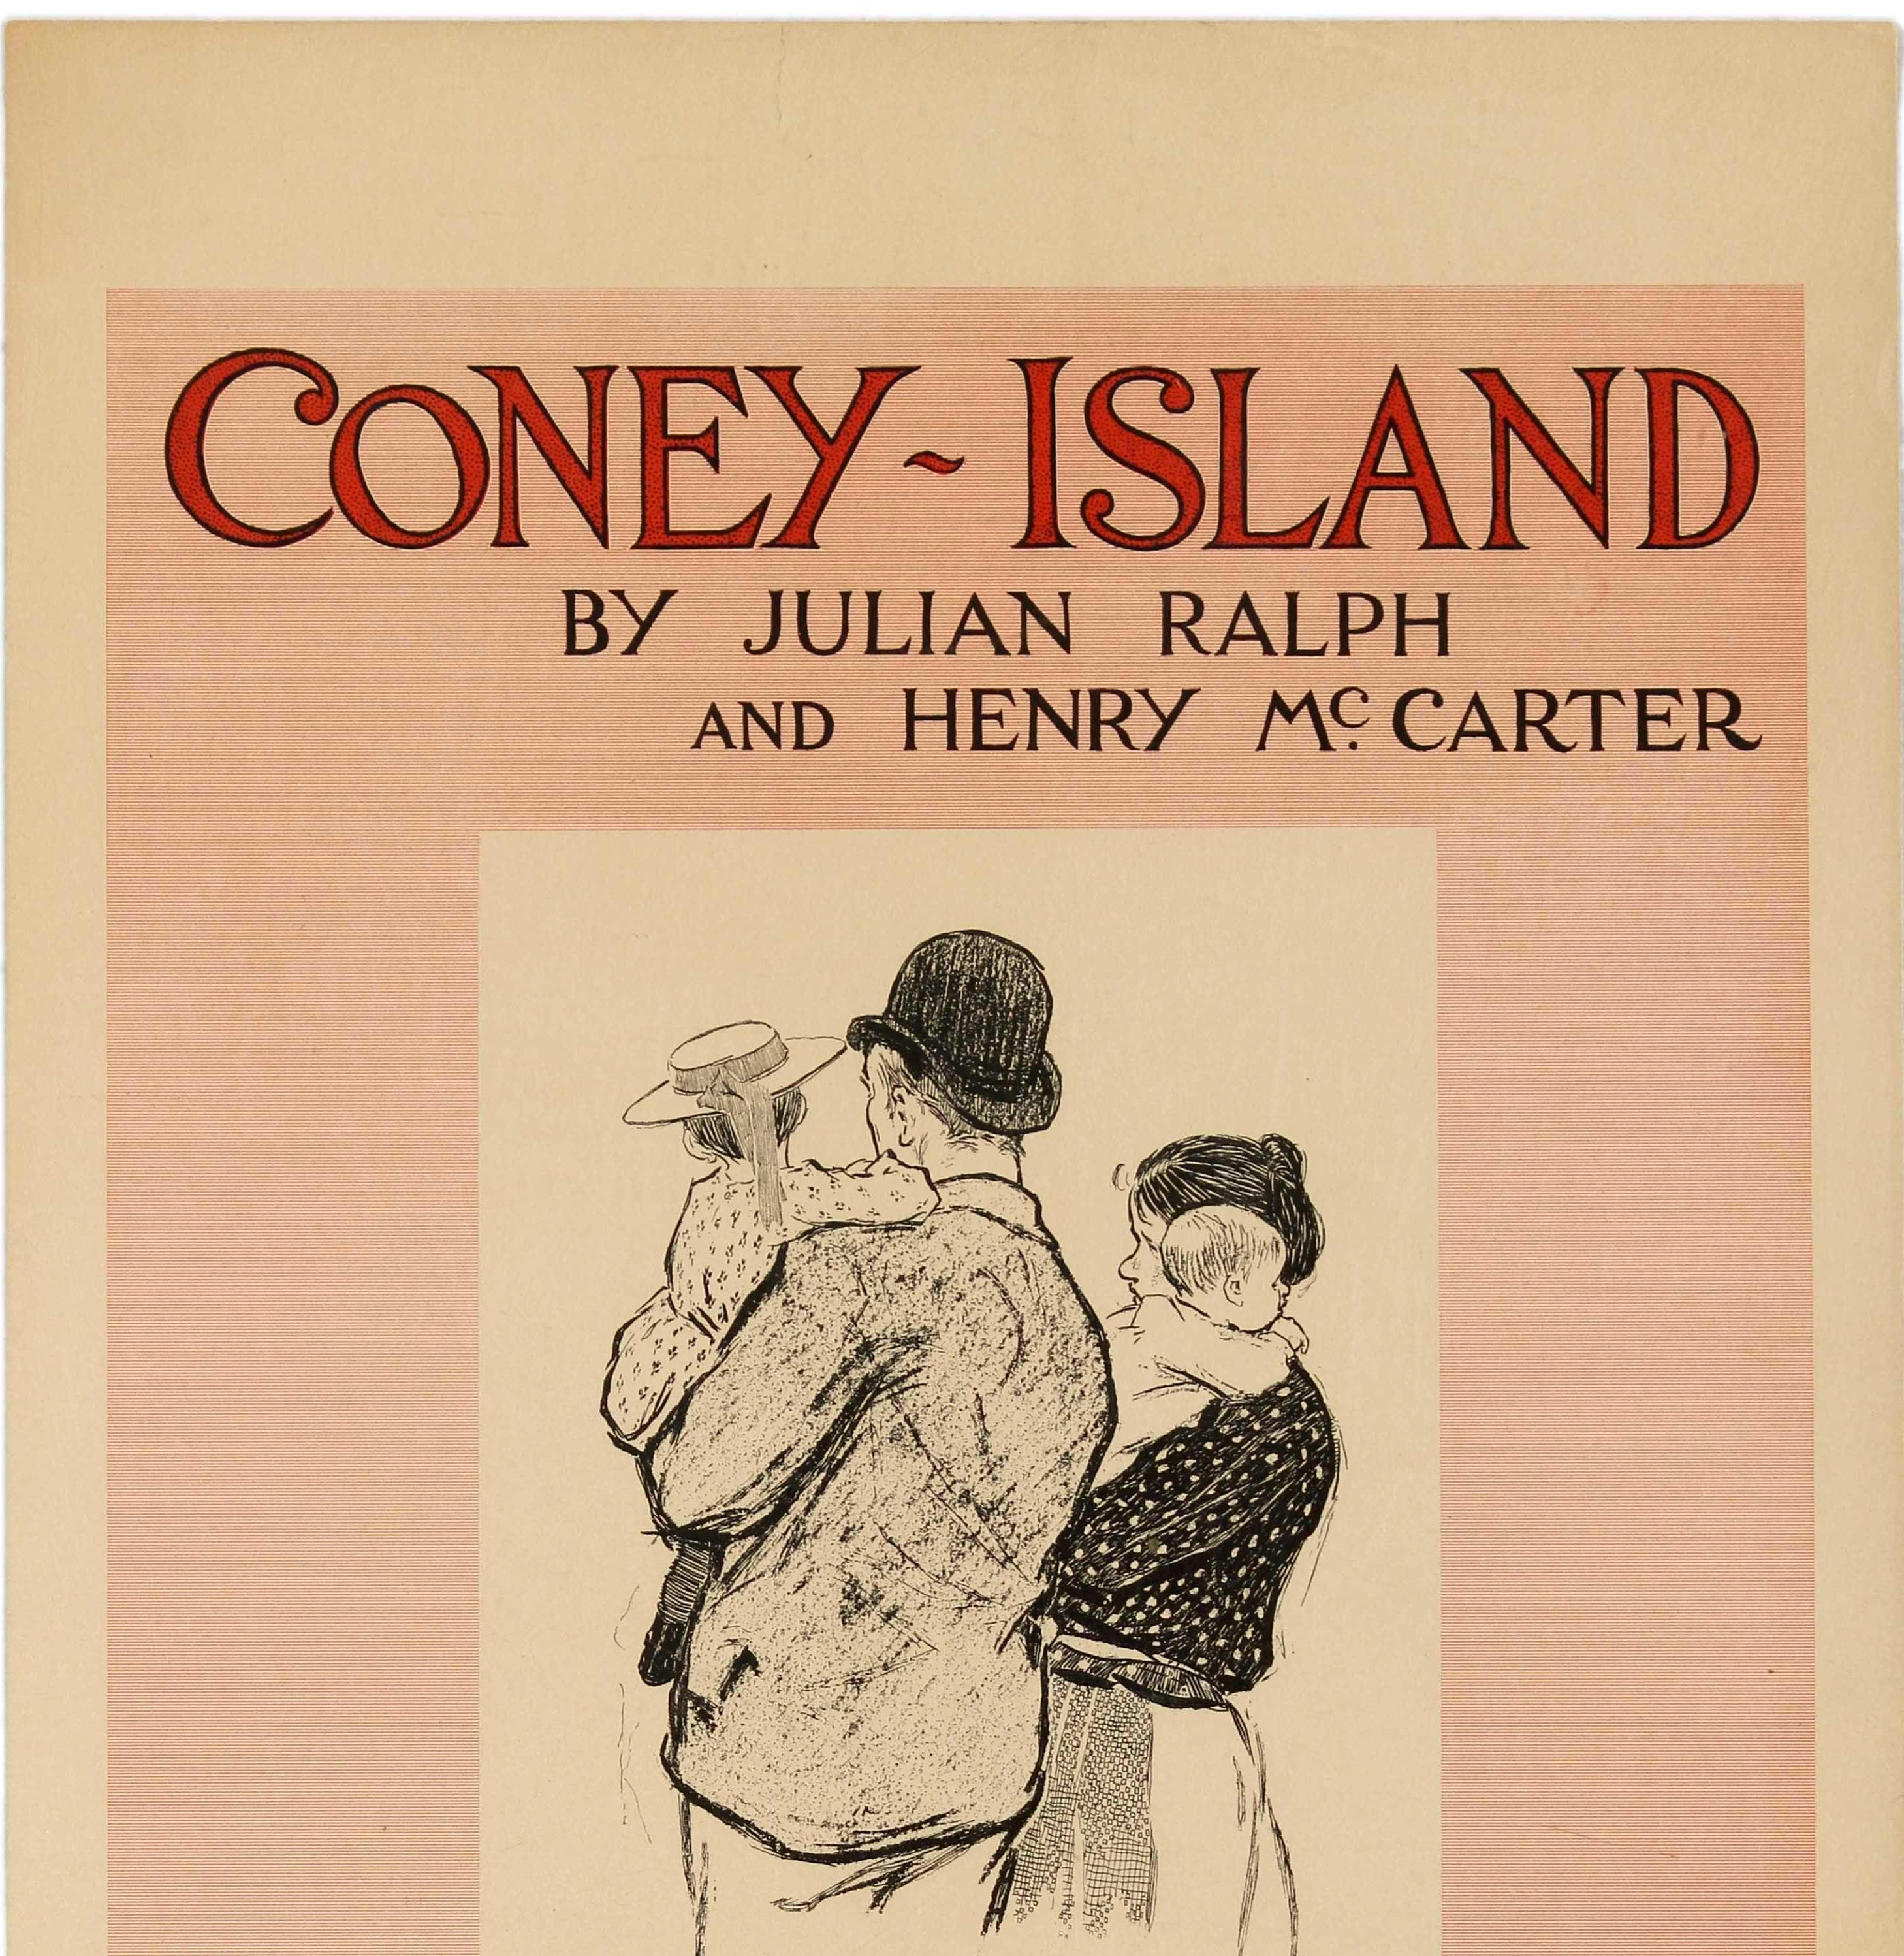 Original antique magazine advertising poster for the American periodical Scribner's (1887-1939) featuring a black and white image depicting a family heading out for a fun time at the popular Coney Island seaside amusement park in Brooklyn New York